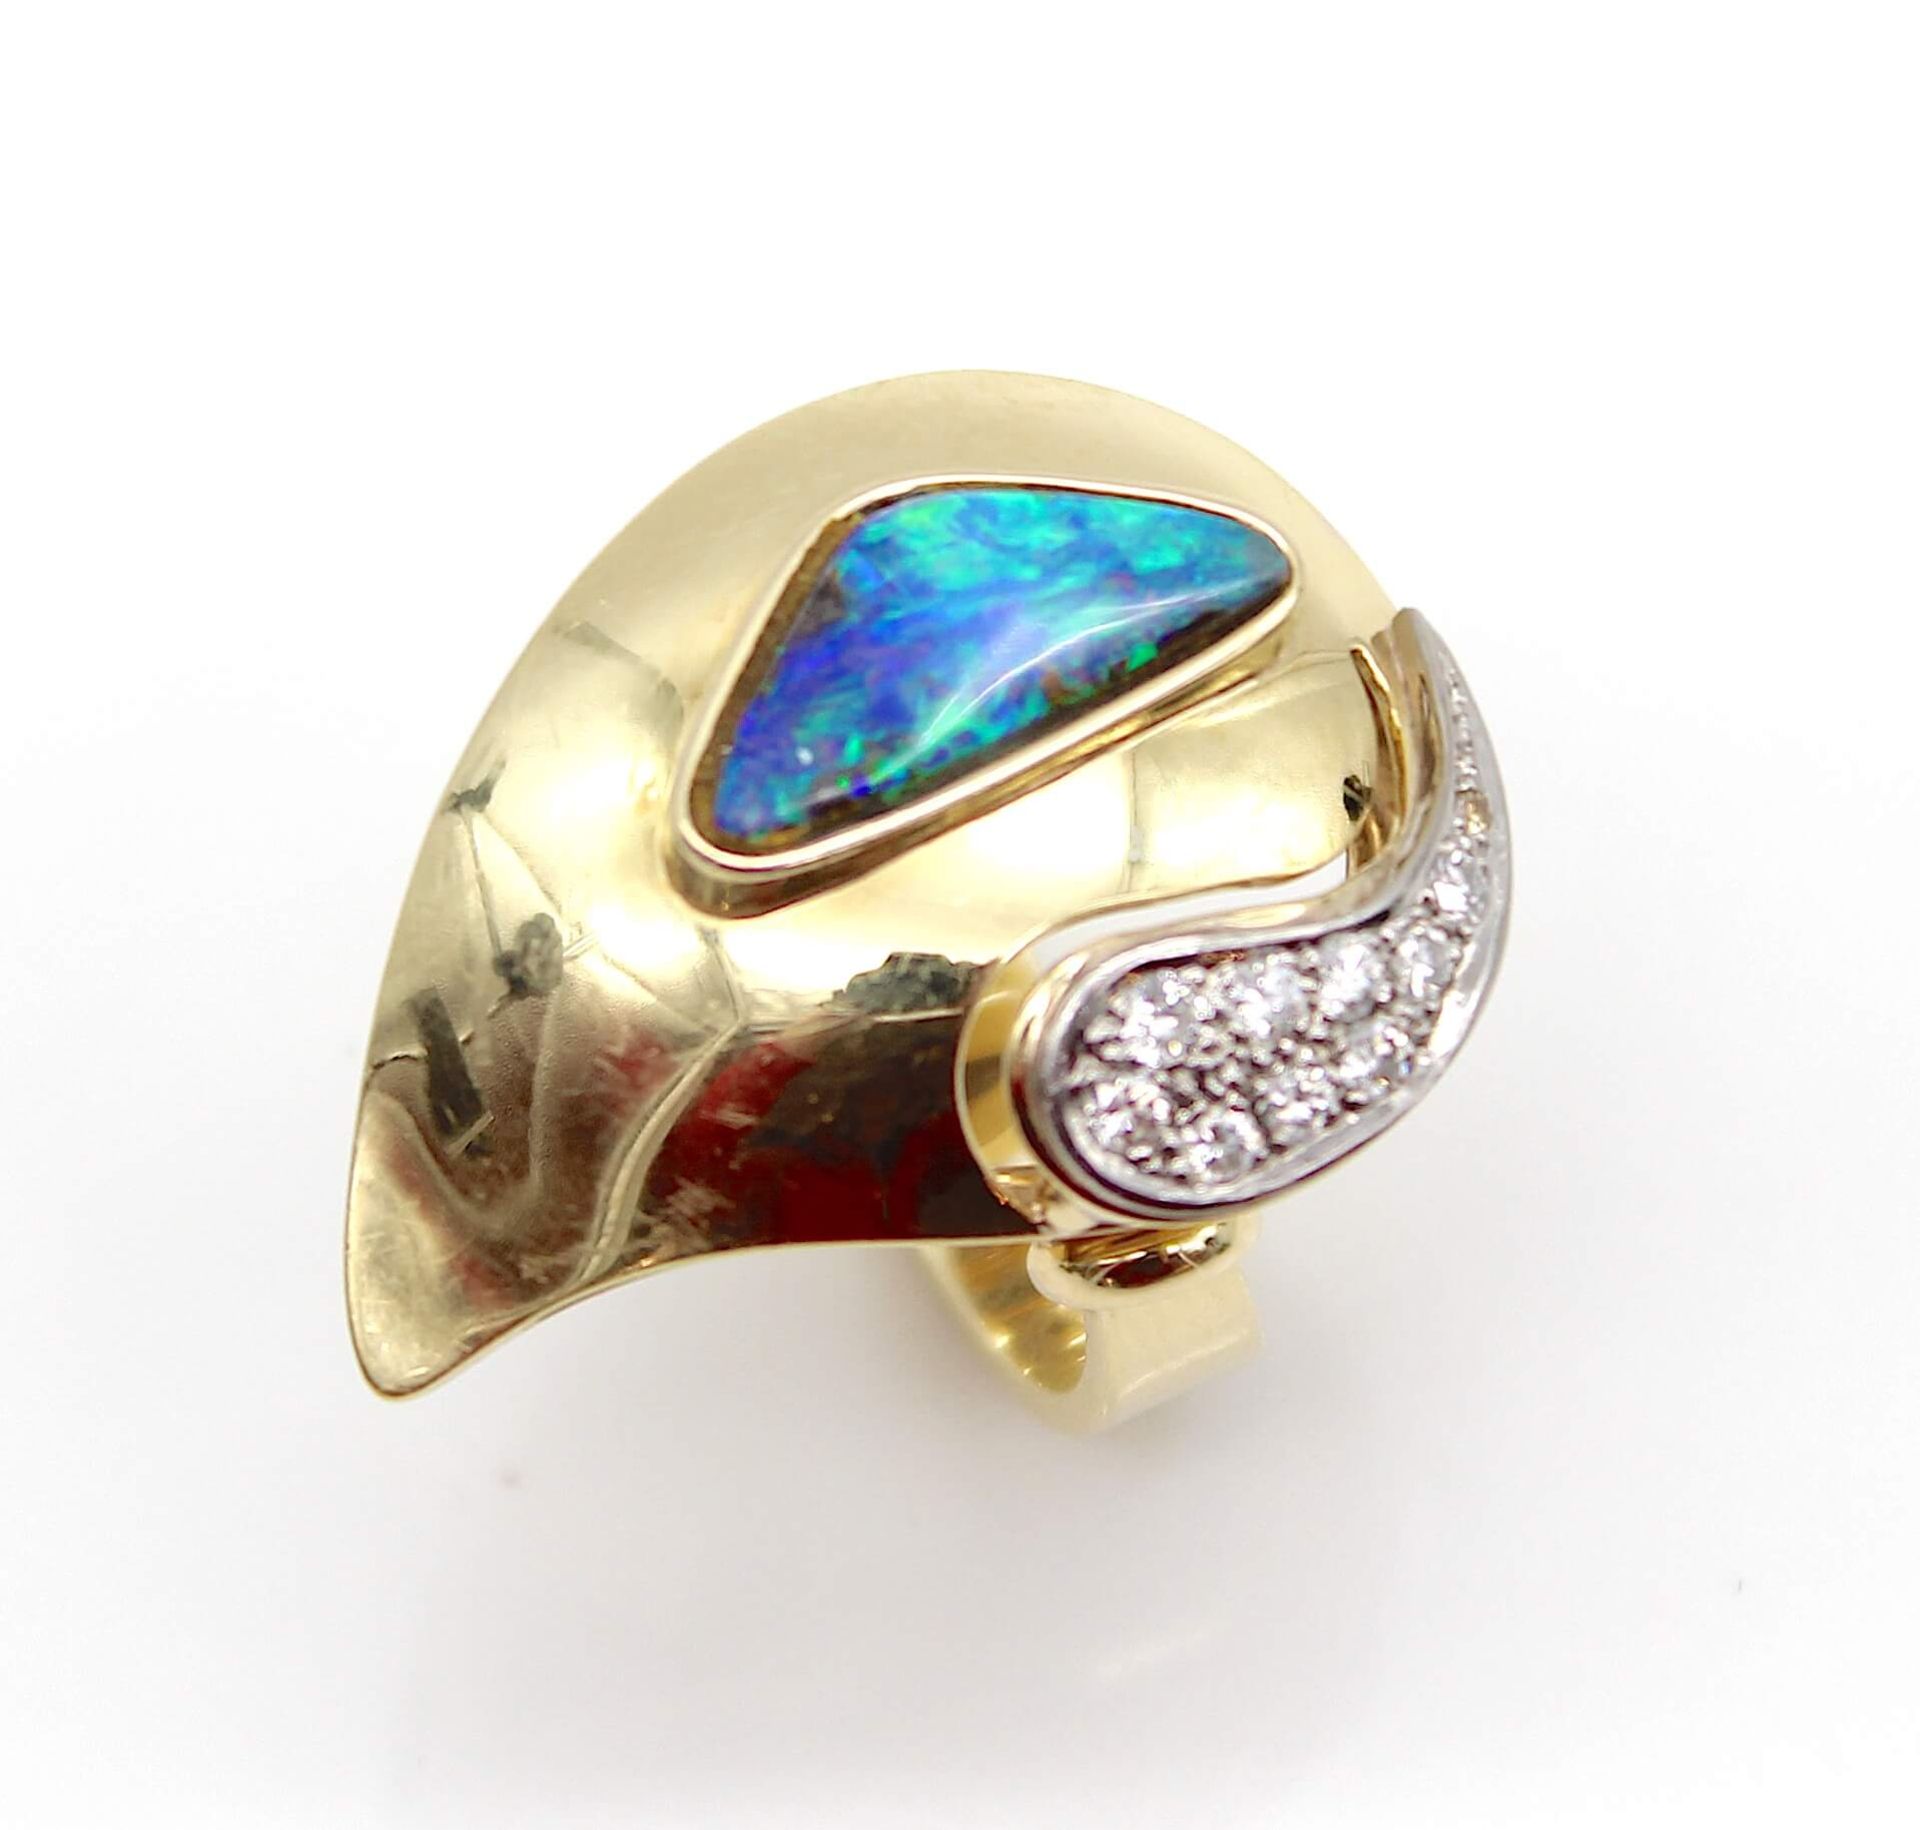 Ring made of 585 gold with 1 boulder opal and 10 brilliants, total ca. 0,25 ct,medium degree of - Bild 3 aus 4